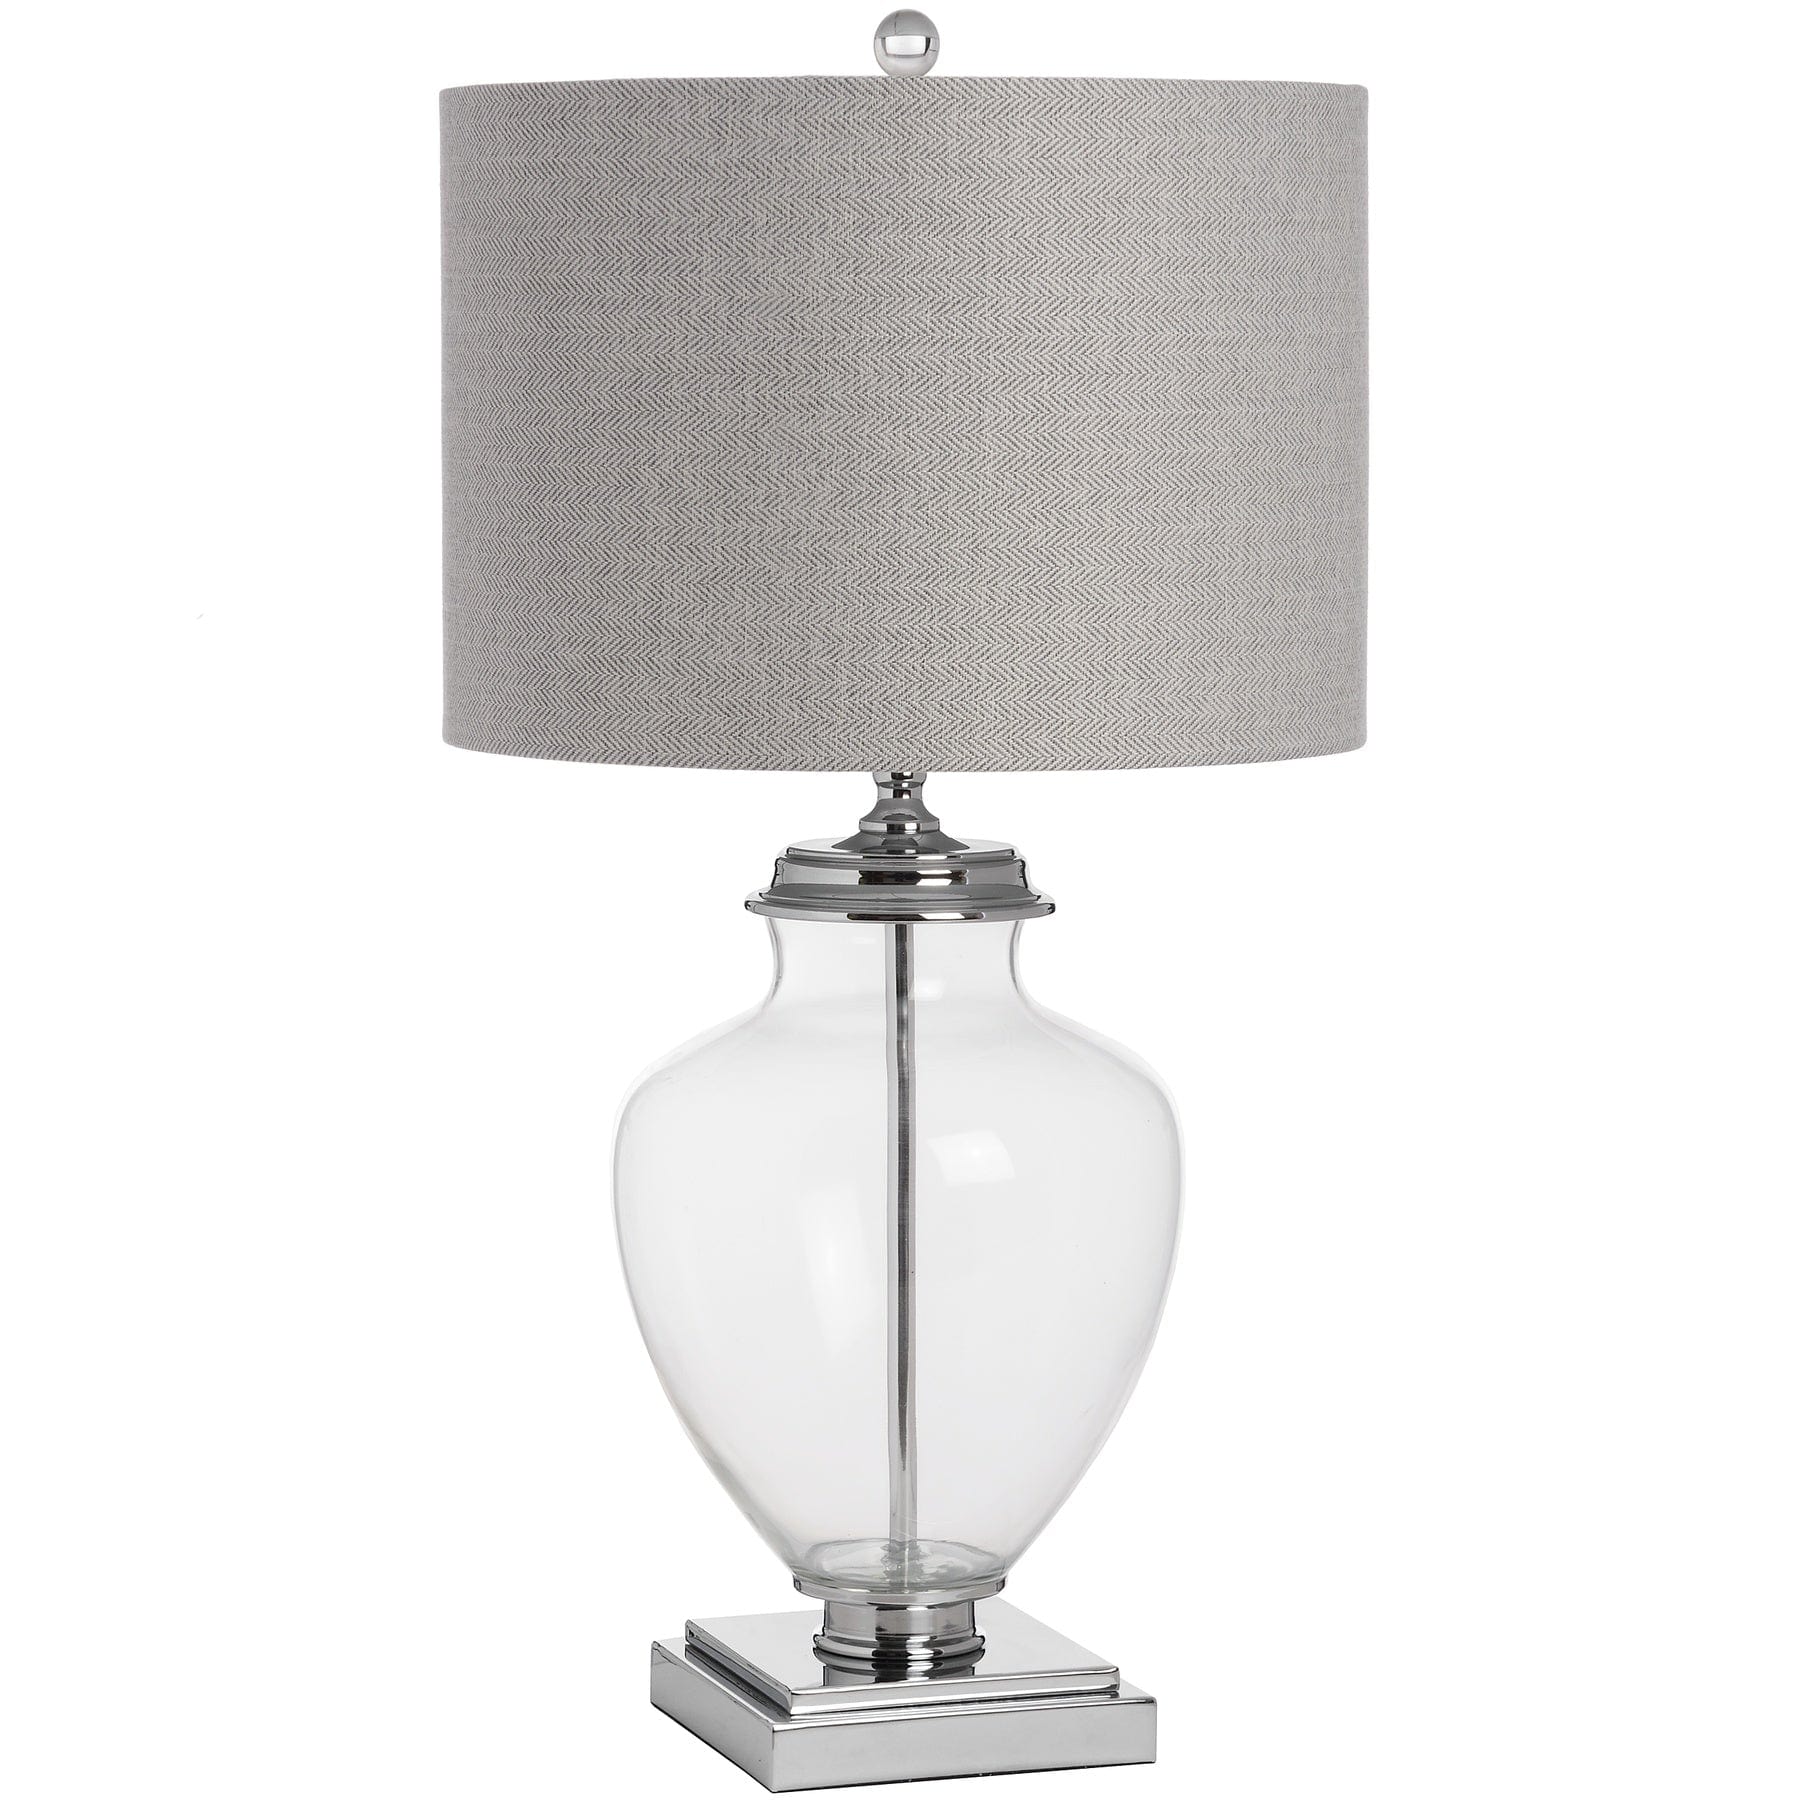 Hill Interiors Table Lamp Perugia Glass Table lamp